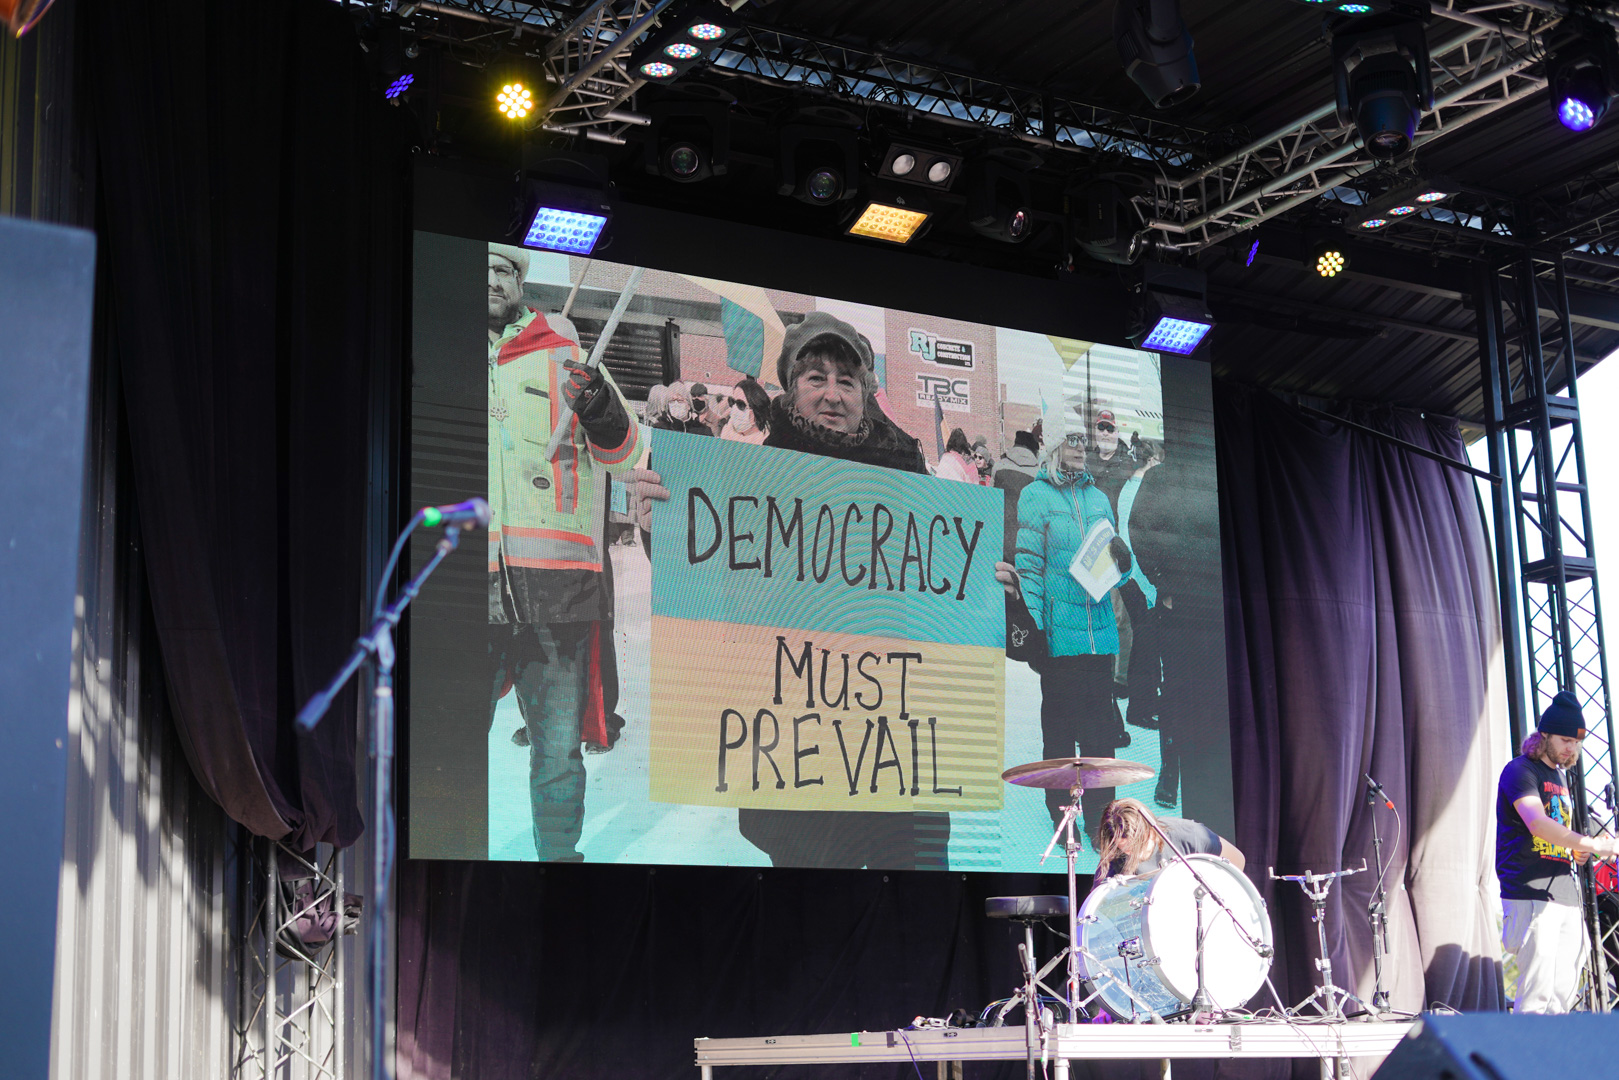 An LED screen shows a woman holding a sign that says "Democracy Must Prevail"